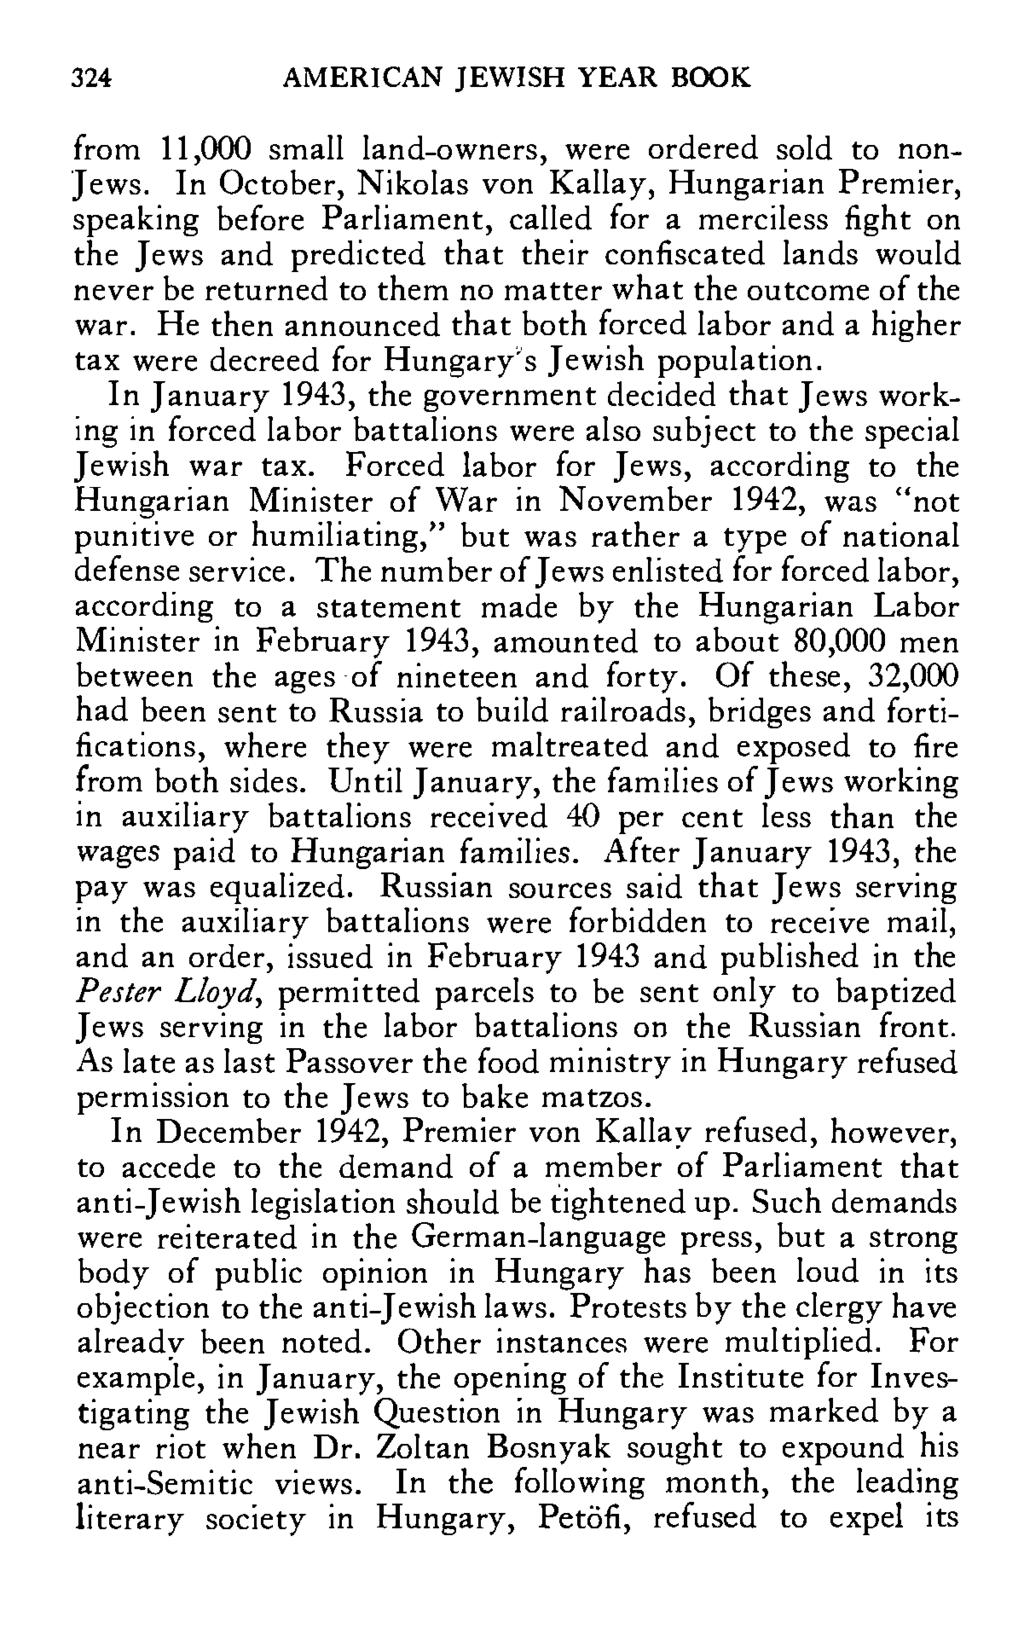 324 AMERICAN JEWISH YEAR BOOK from 11,000 small land-owners, were ordered sold to non- Jews.